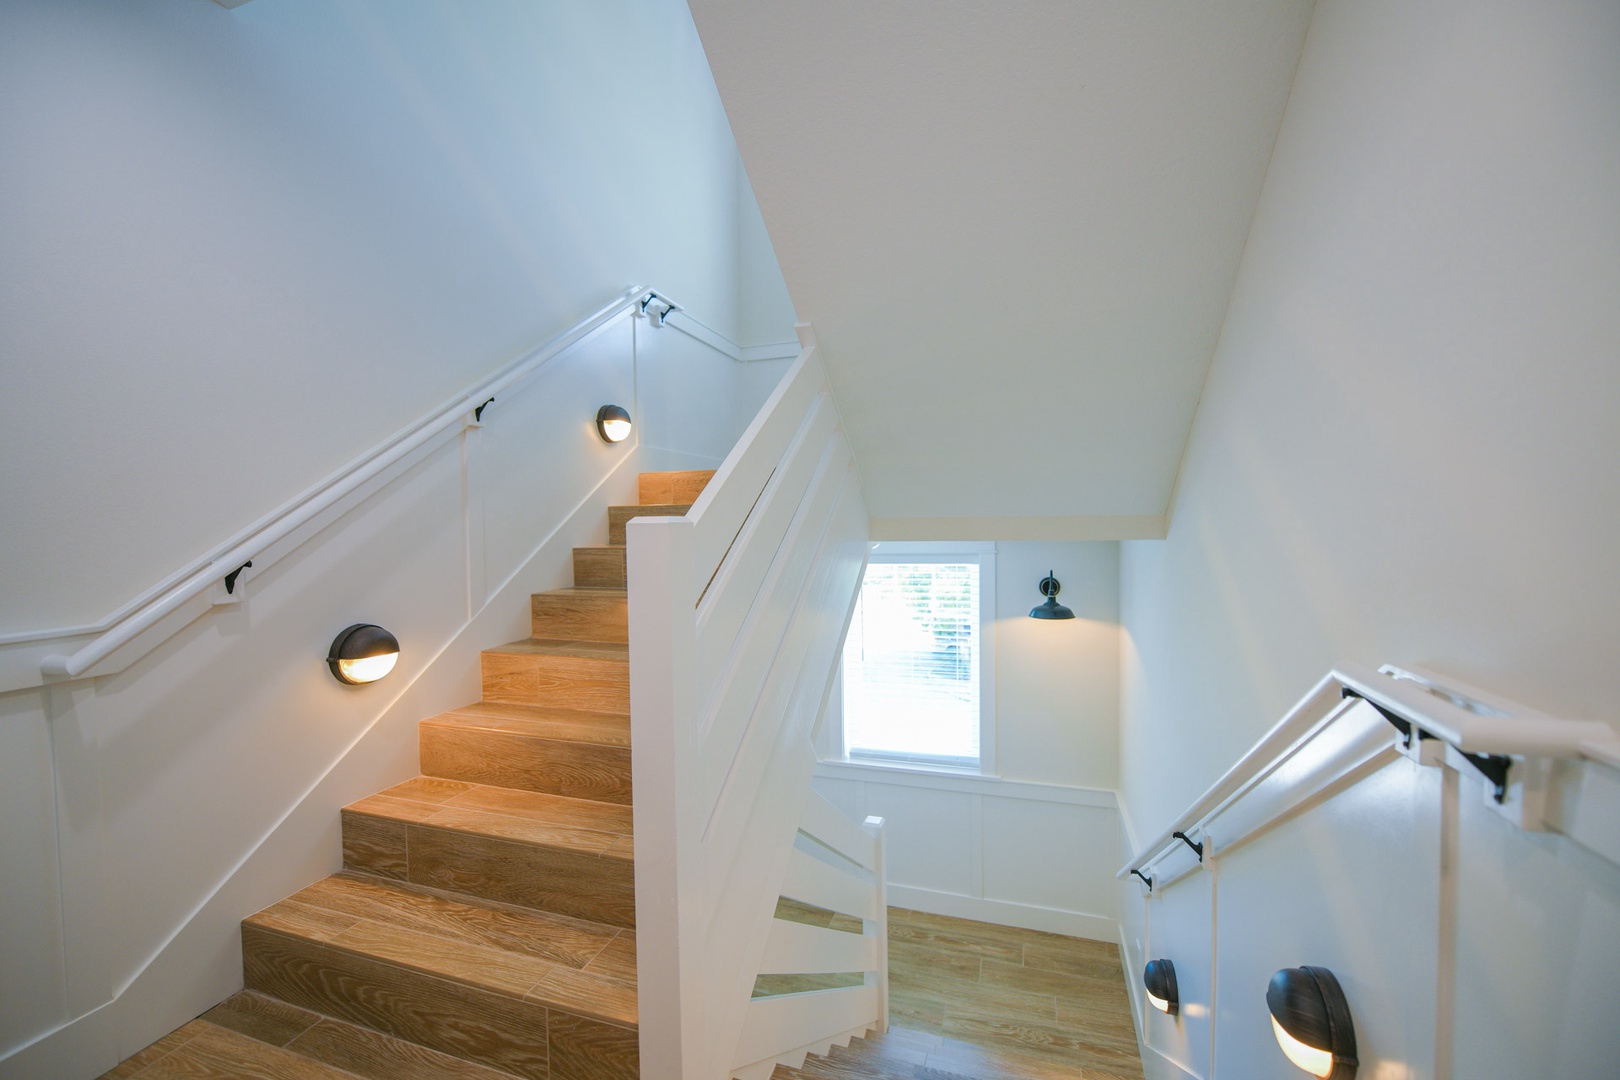 Stairwell with motion sensor lighting to All Floors